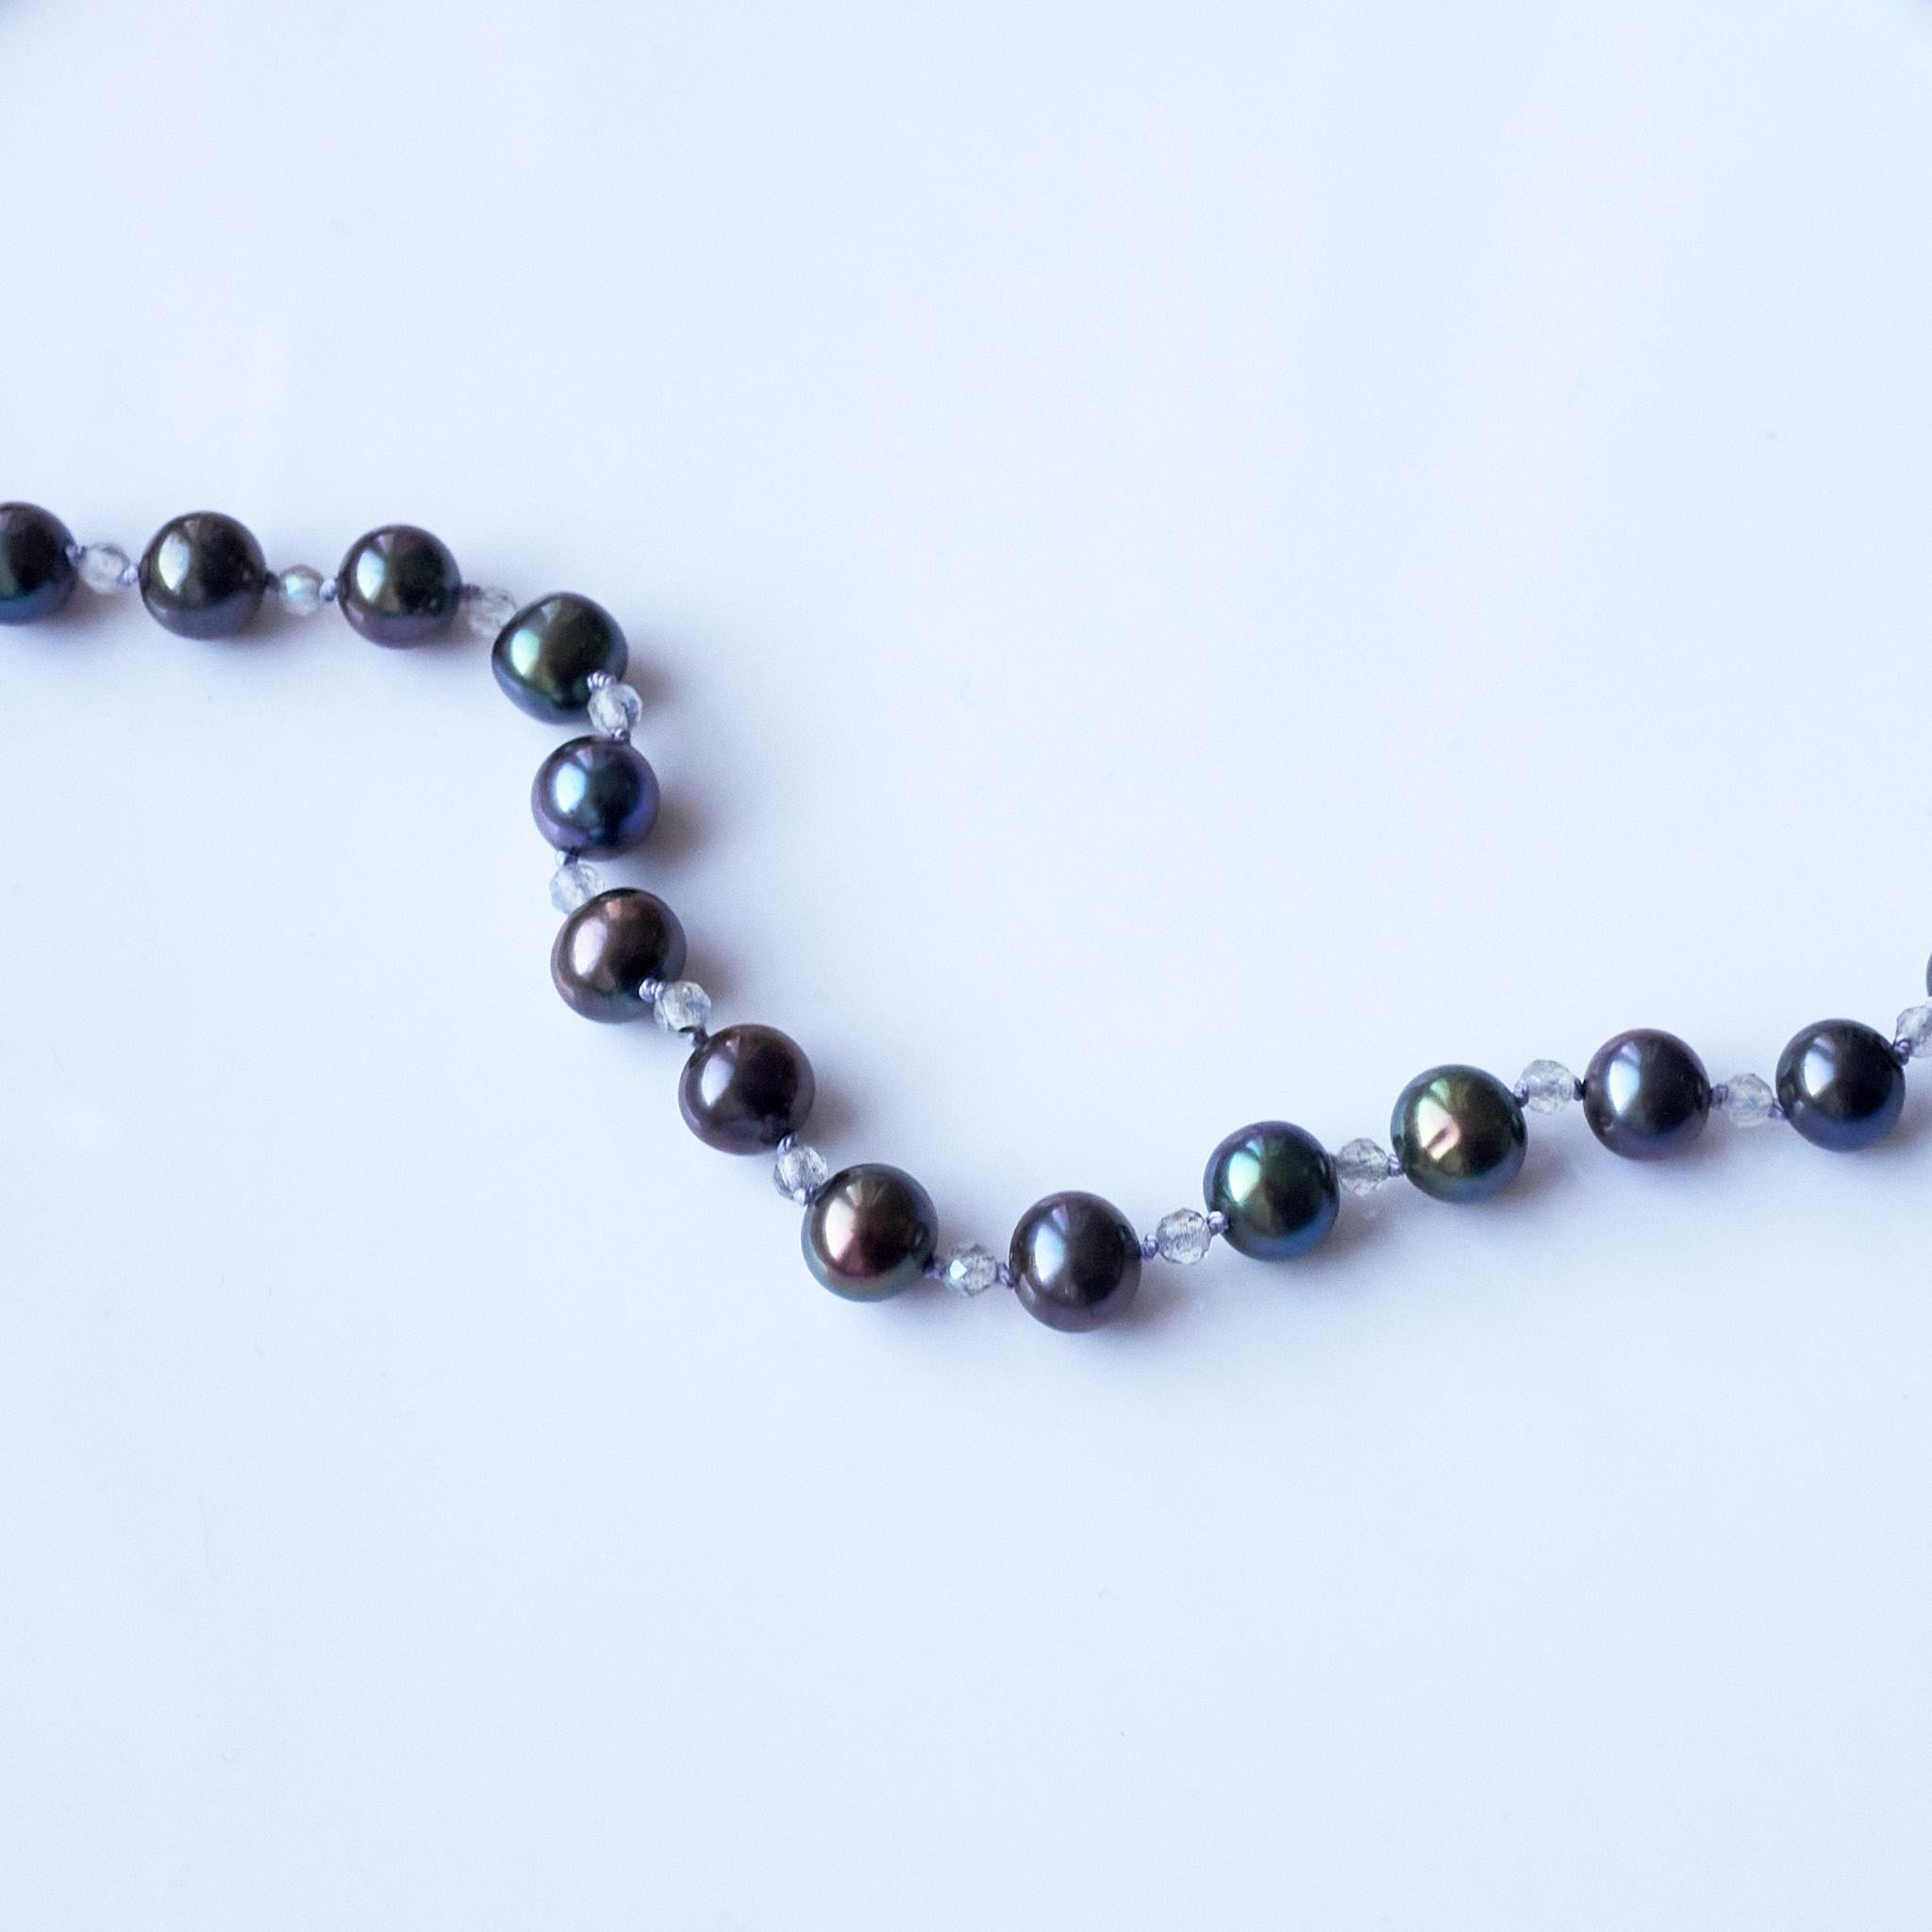 Victorian Black Pearl Labradorite Beaded Necklace Lilac Silk Thread J Dauphin For Sale